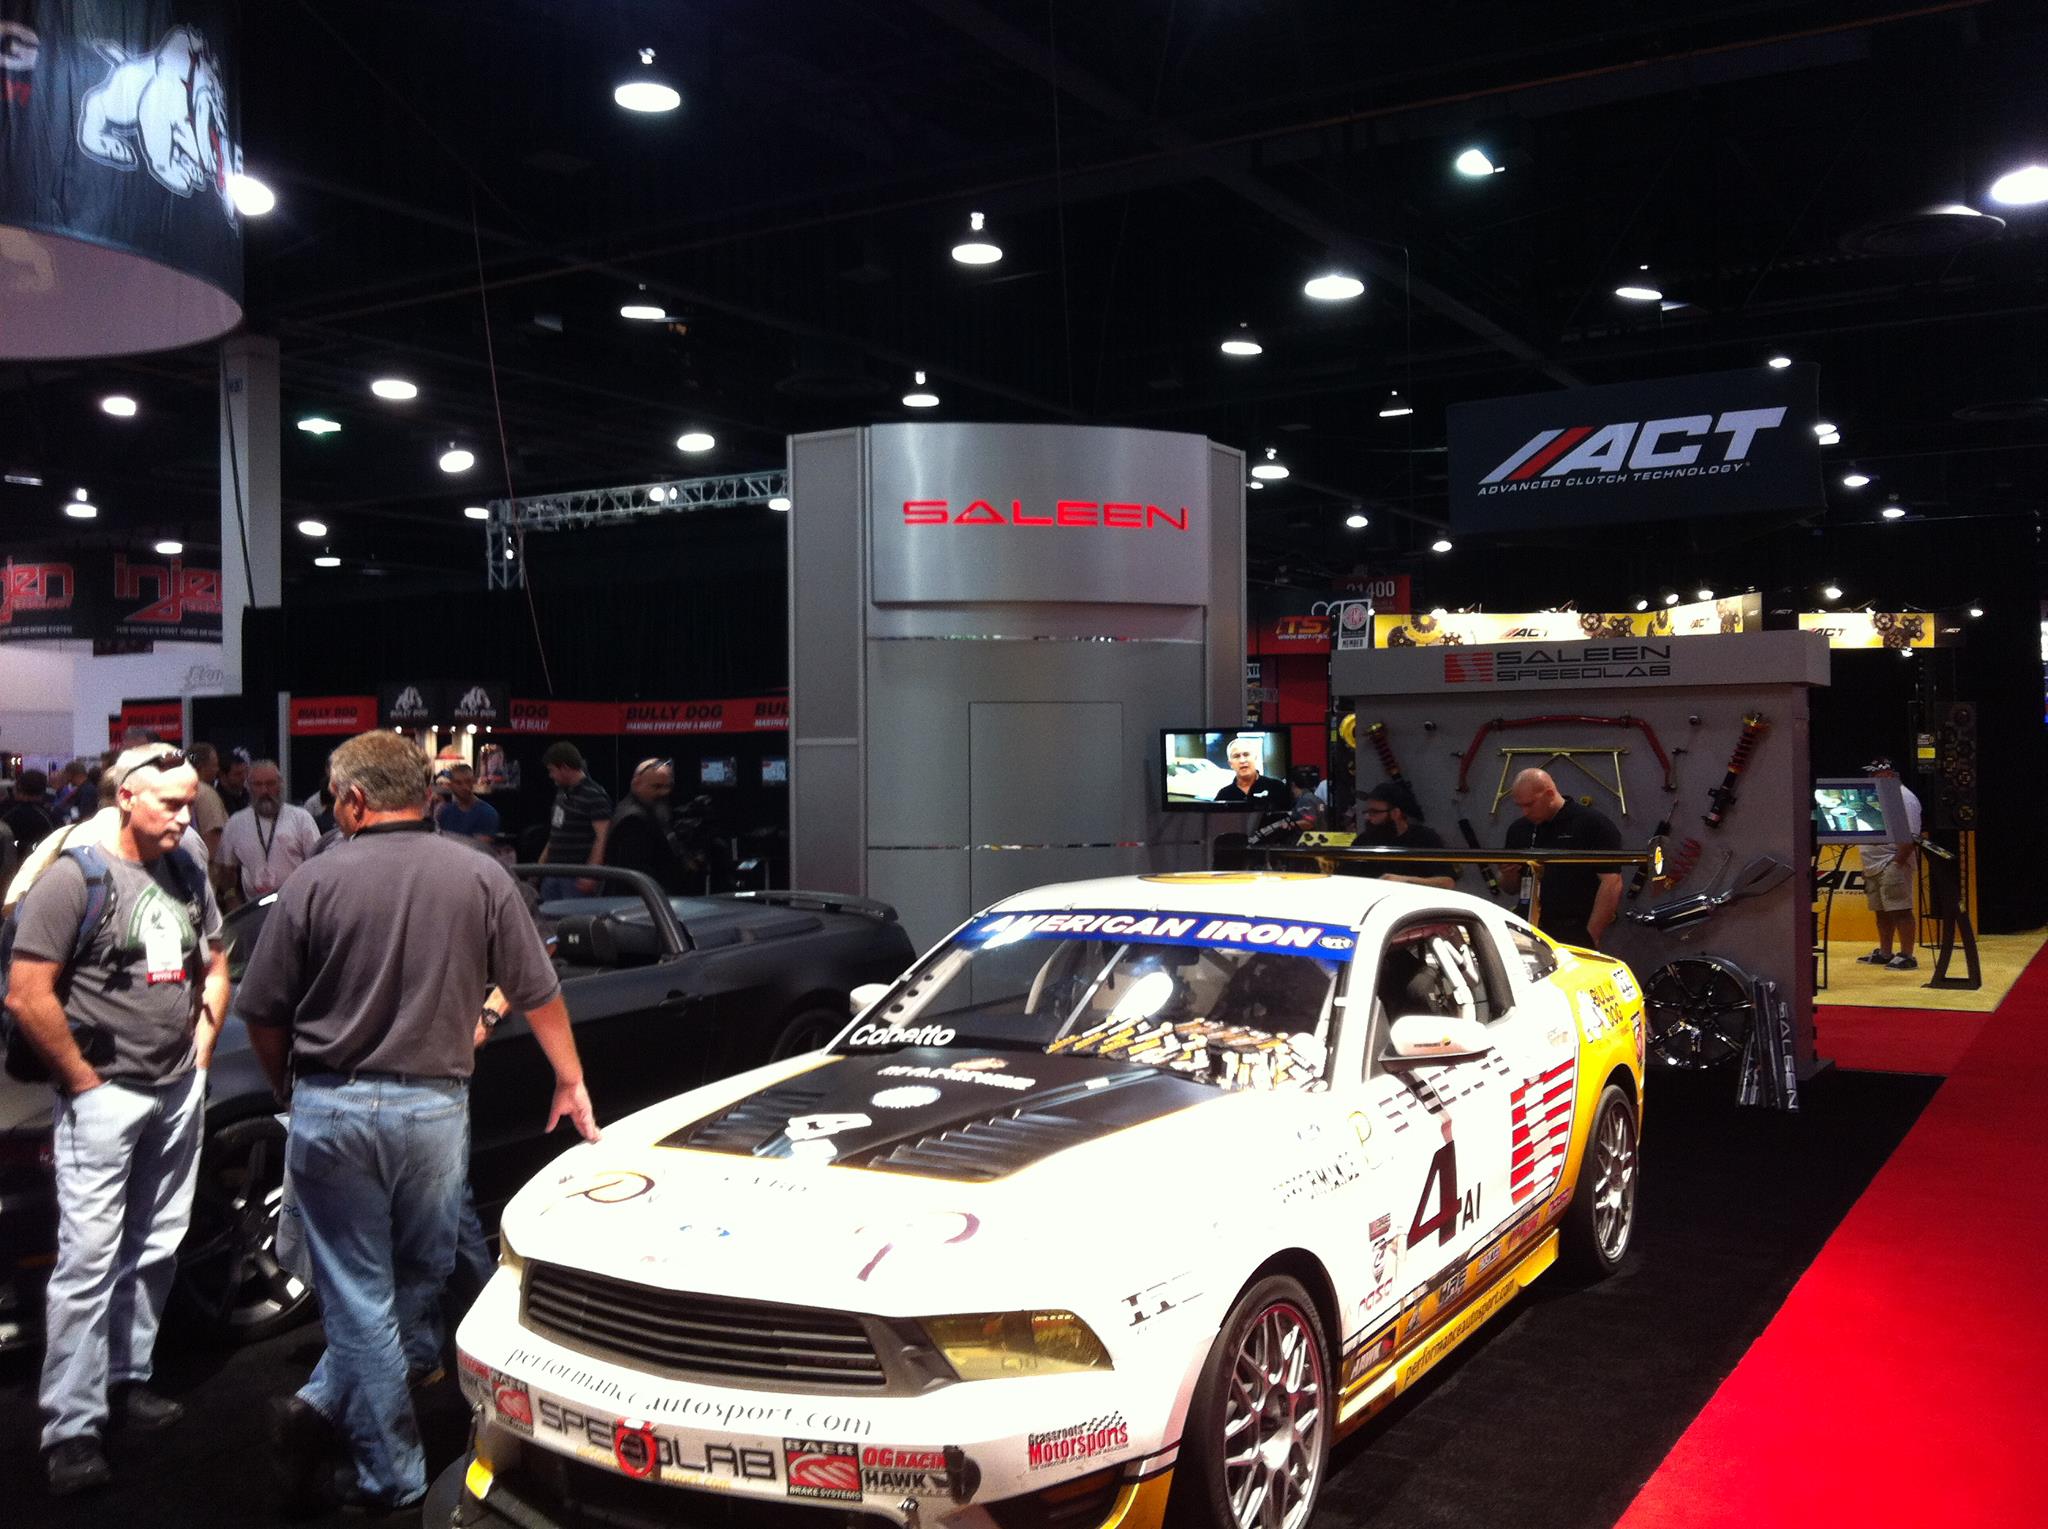 SEMA show is open!! Busy busy. Come visit our booth if you are at the show. Booth 21248